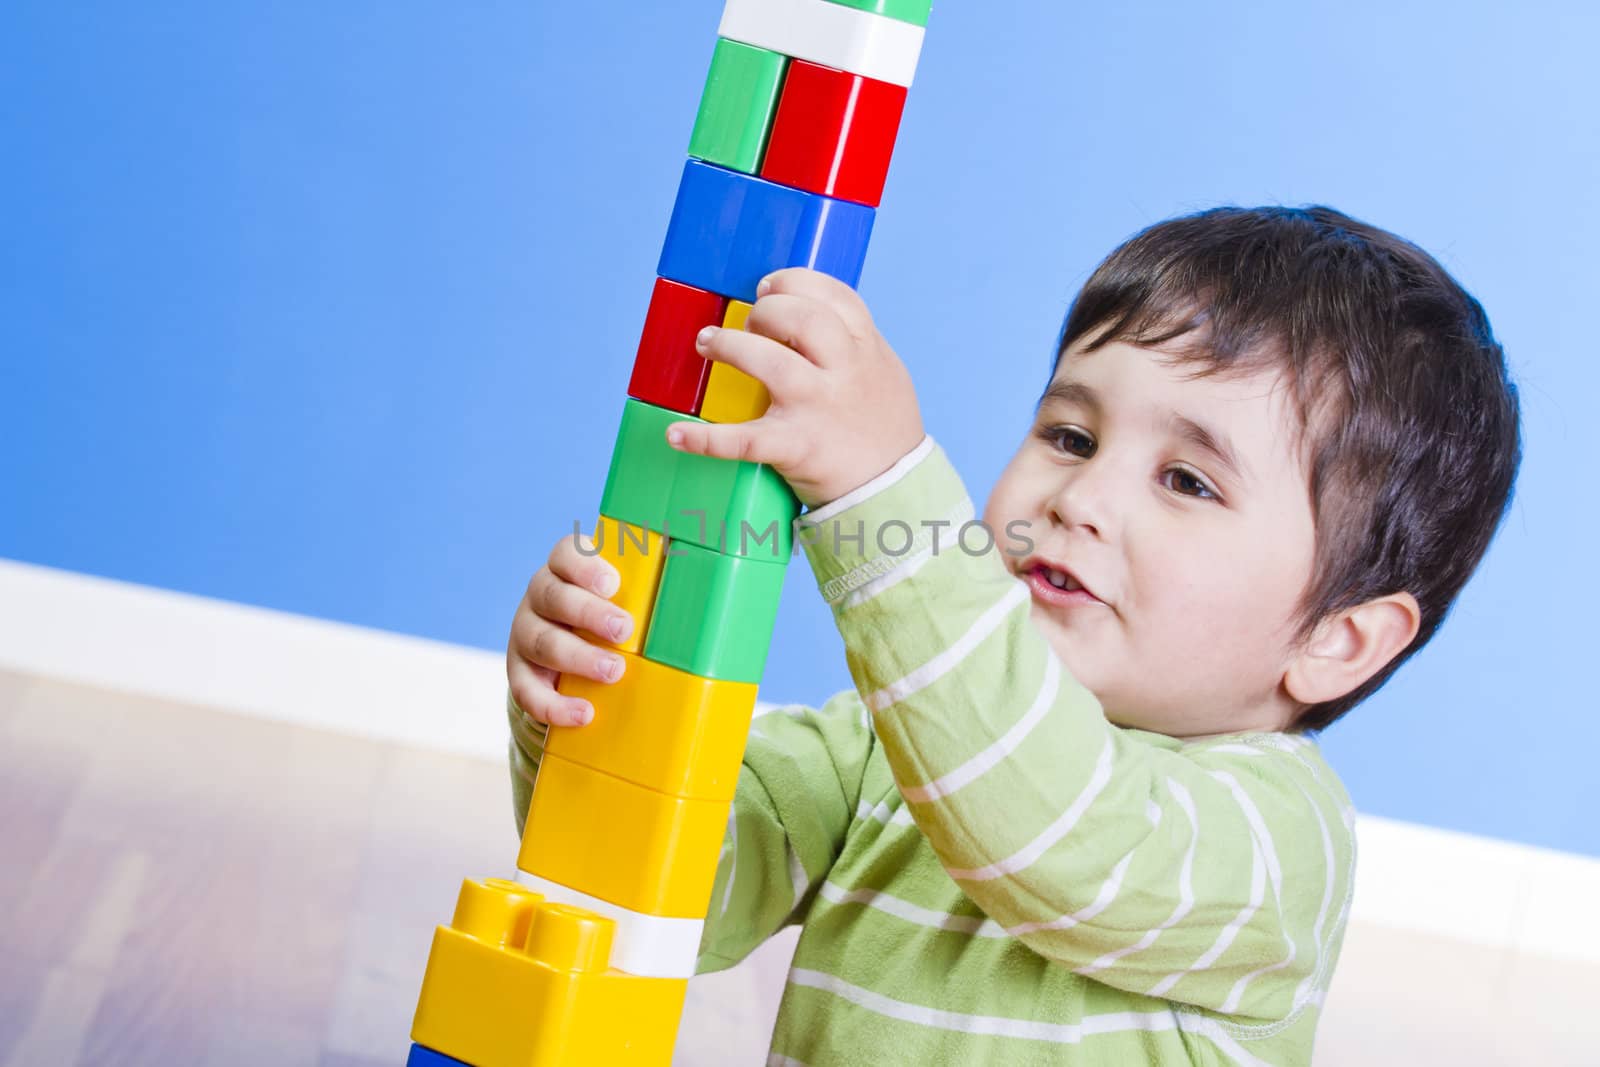 A happy little boy is building a colorful toy block tower